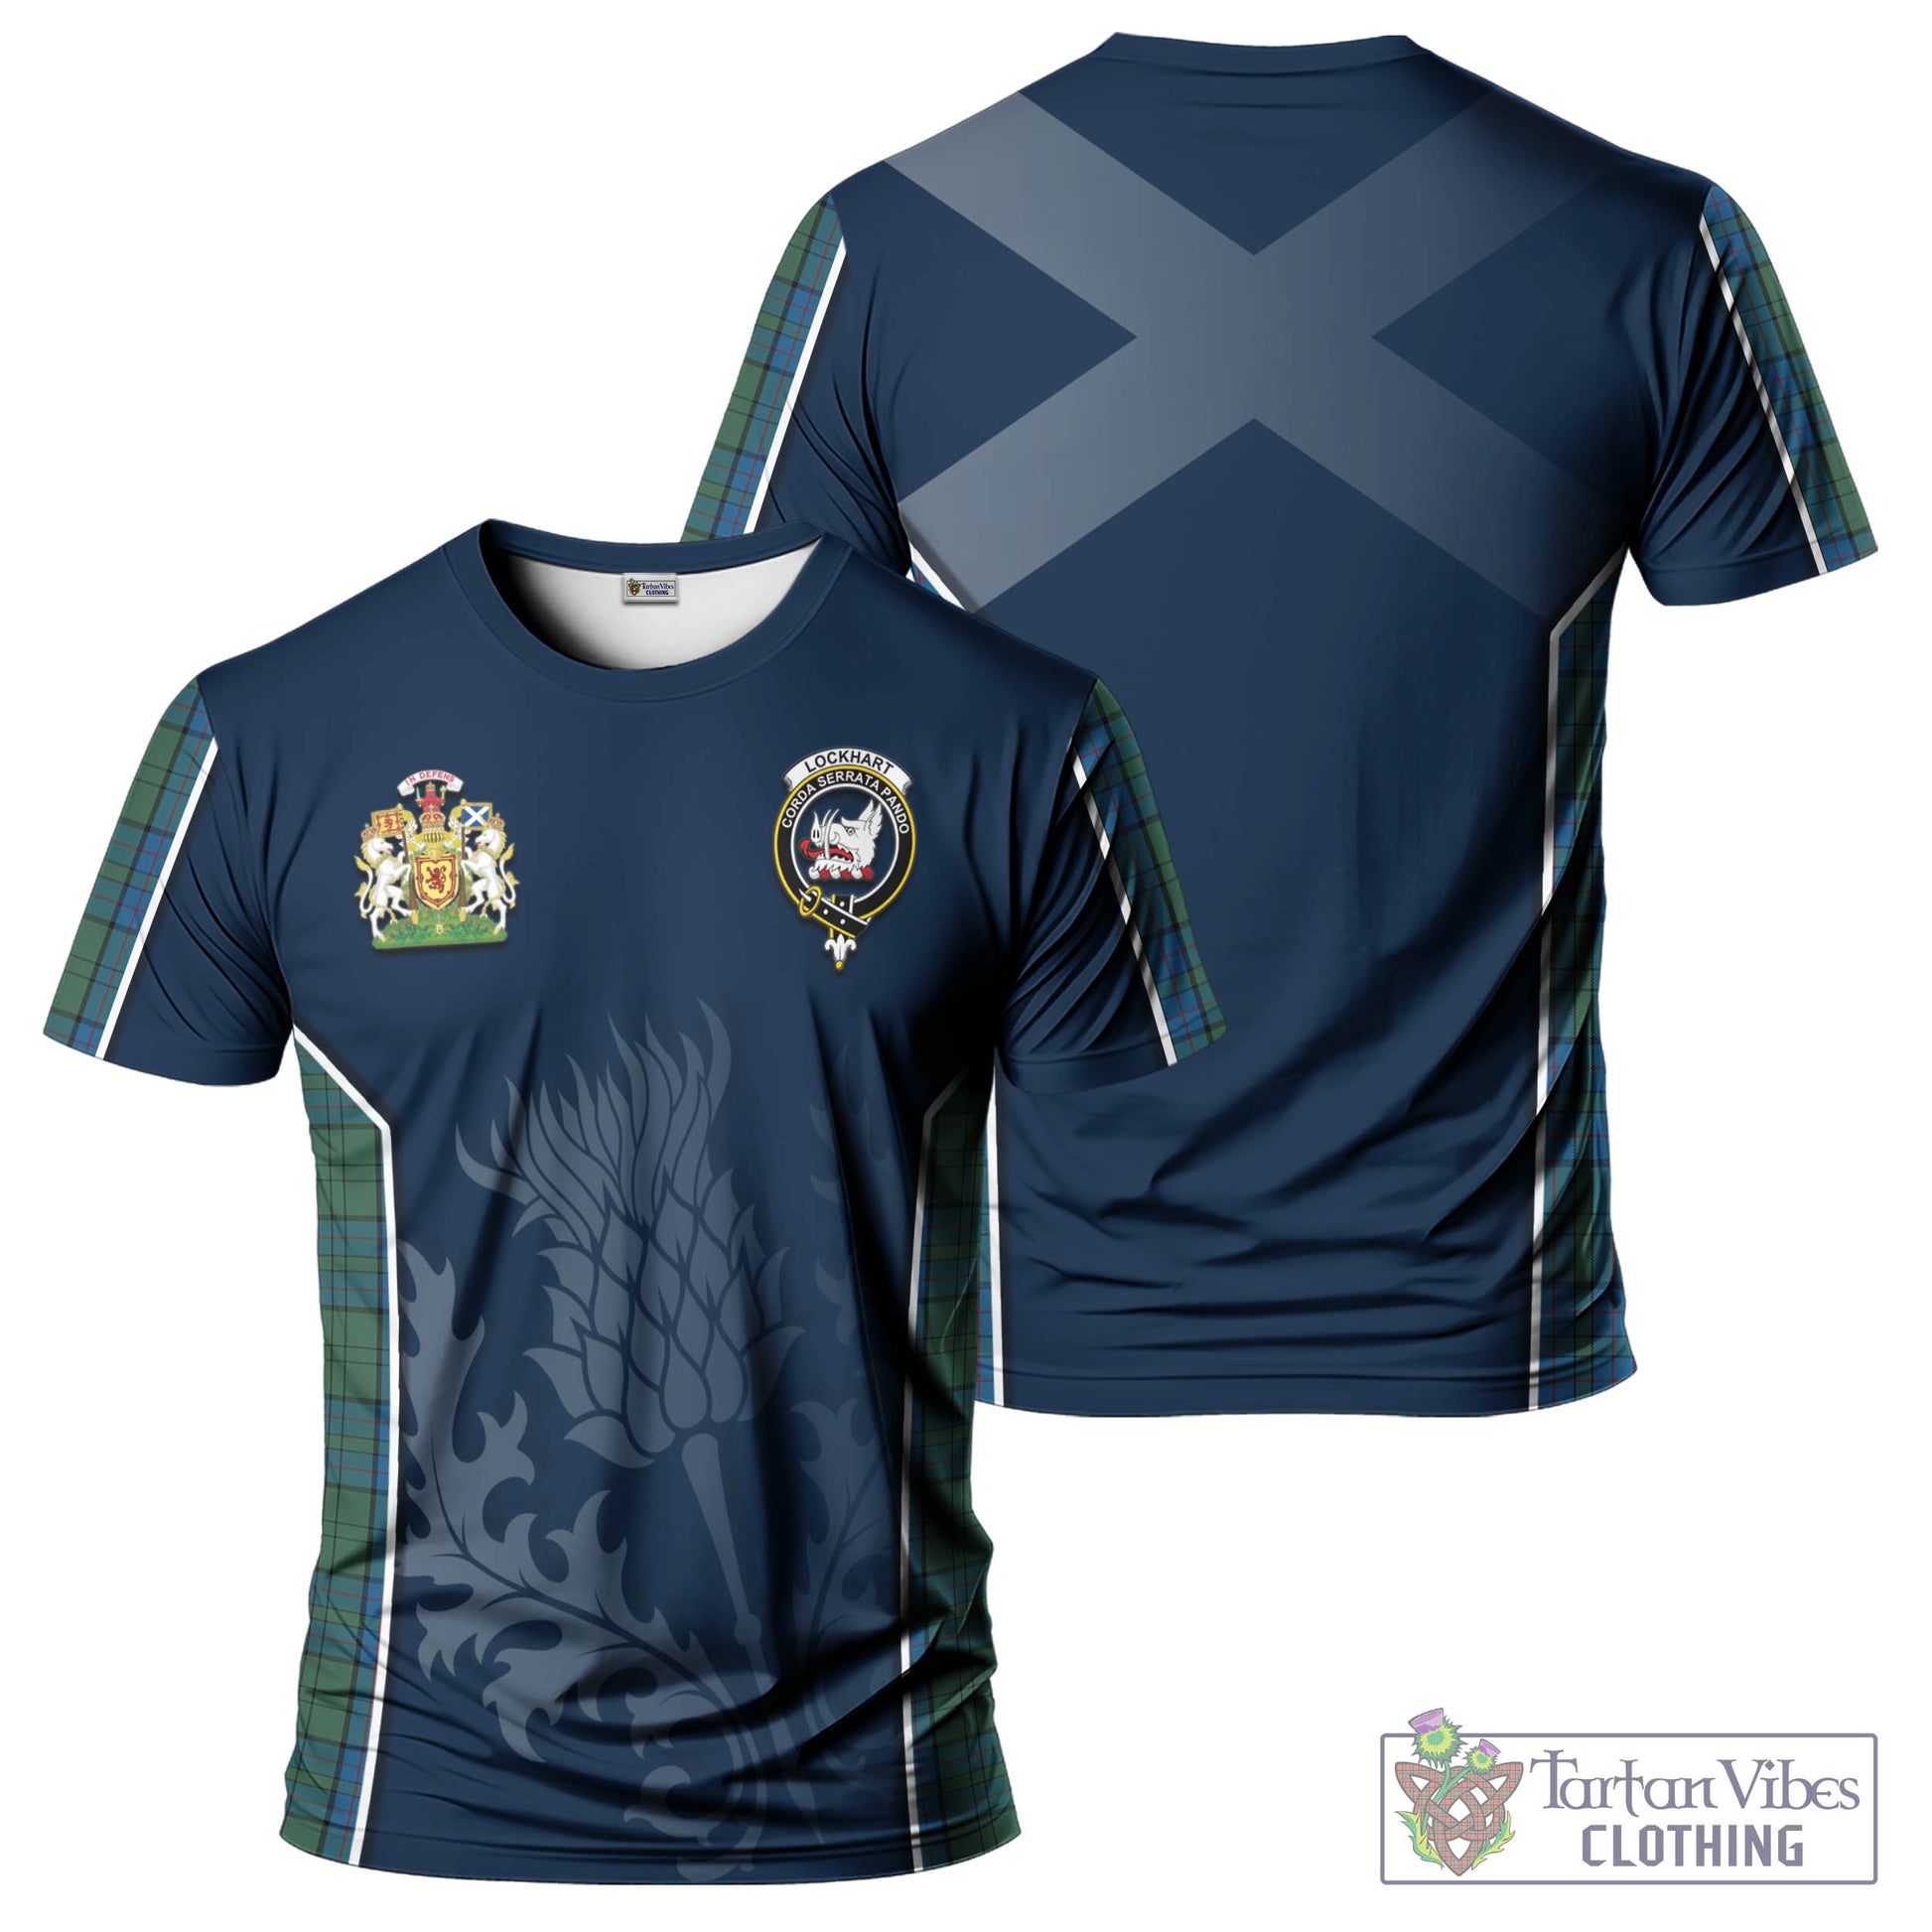 Tartan Vibes Clothing Lockhart Tartan T-Shirt with Family Crest and Scottish Thistle Vibes Sport Style